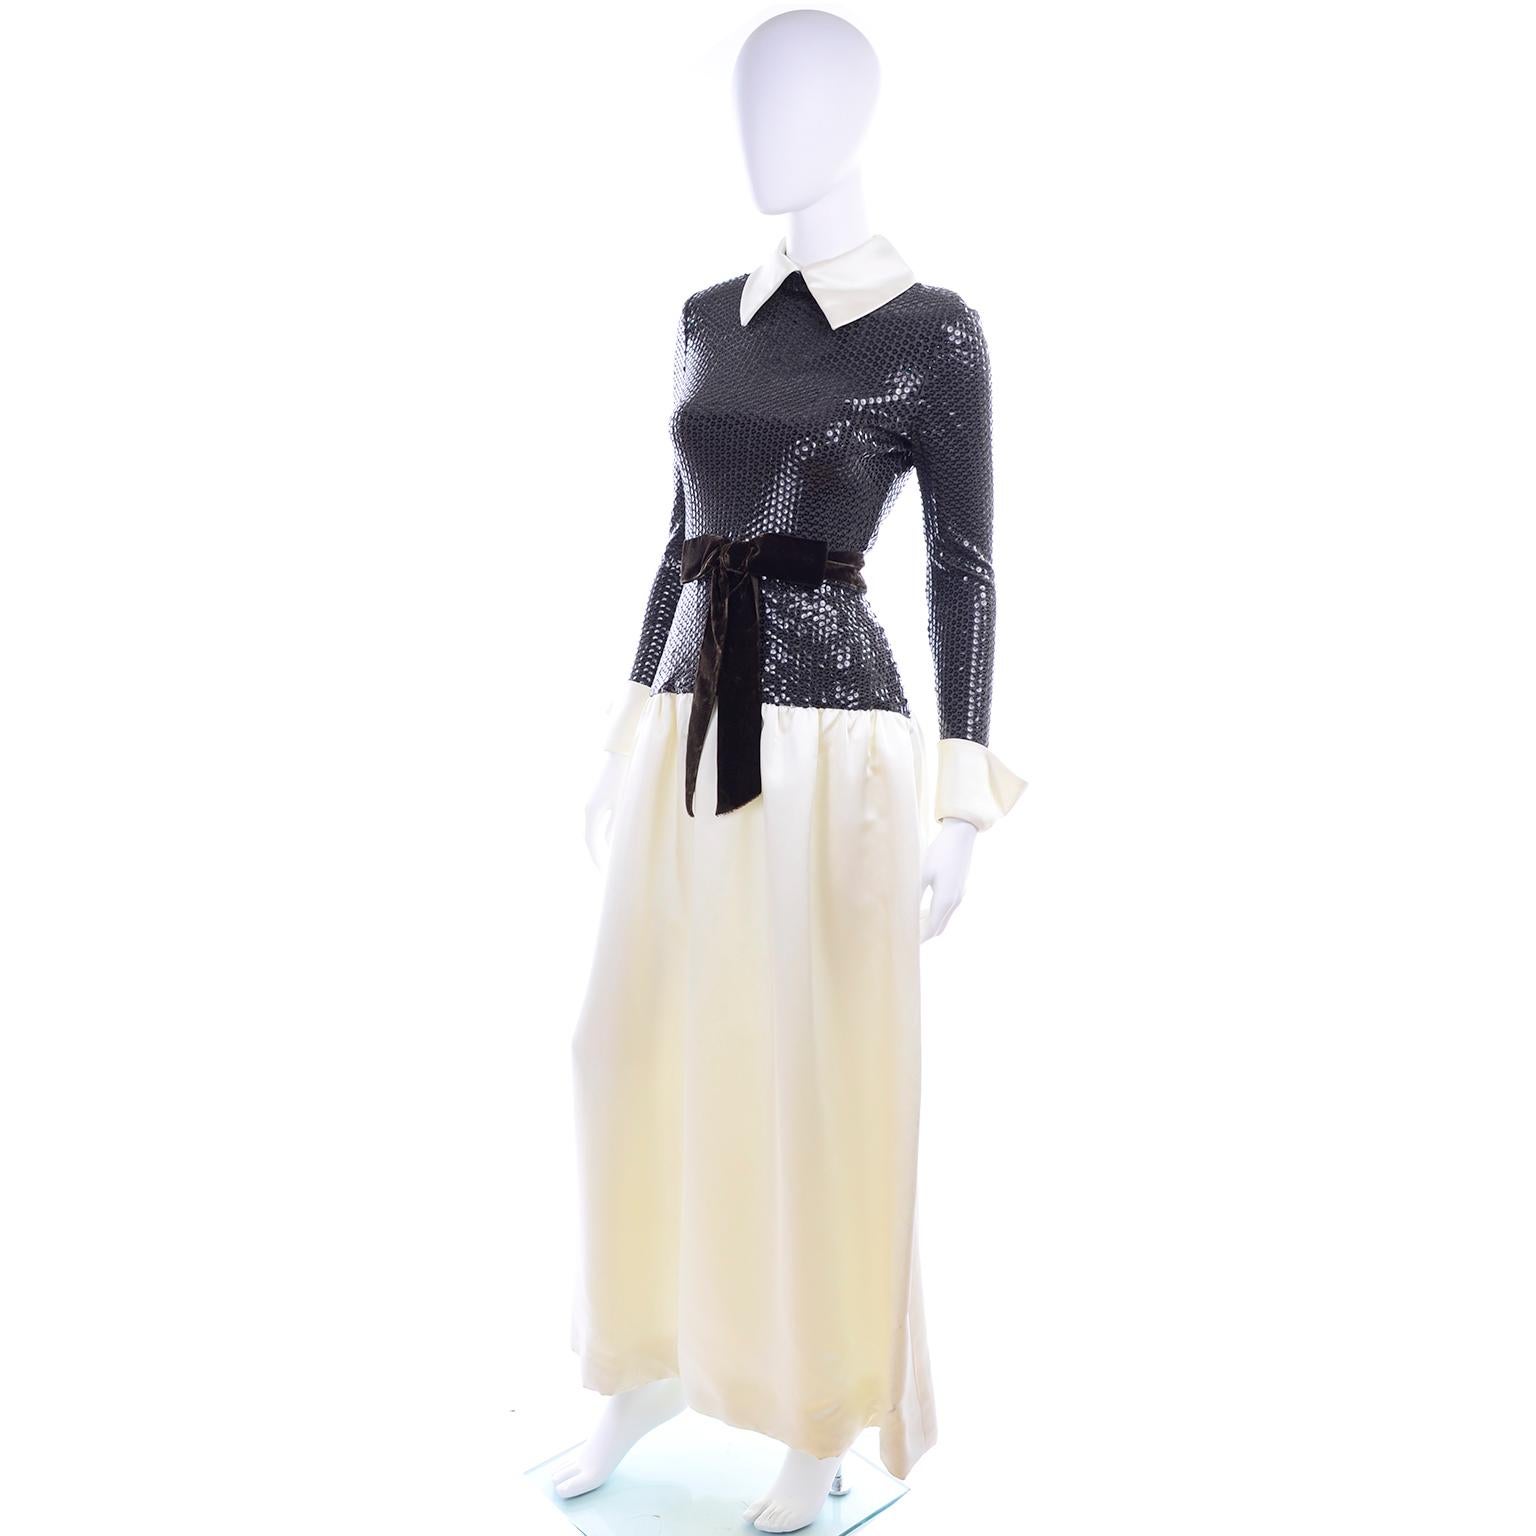 Kiki Hart Vintage Evening Dress Ivory Satin W Brown Sequin Bodice & Velvet Bow In Good Condition For Sale In Portland, OR